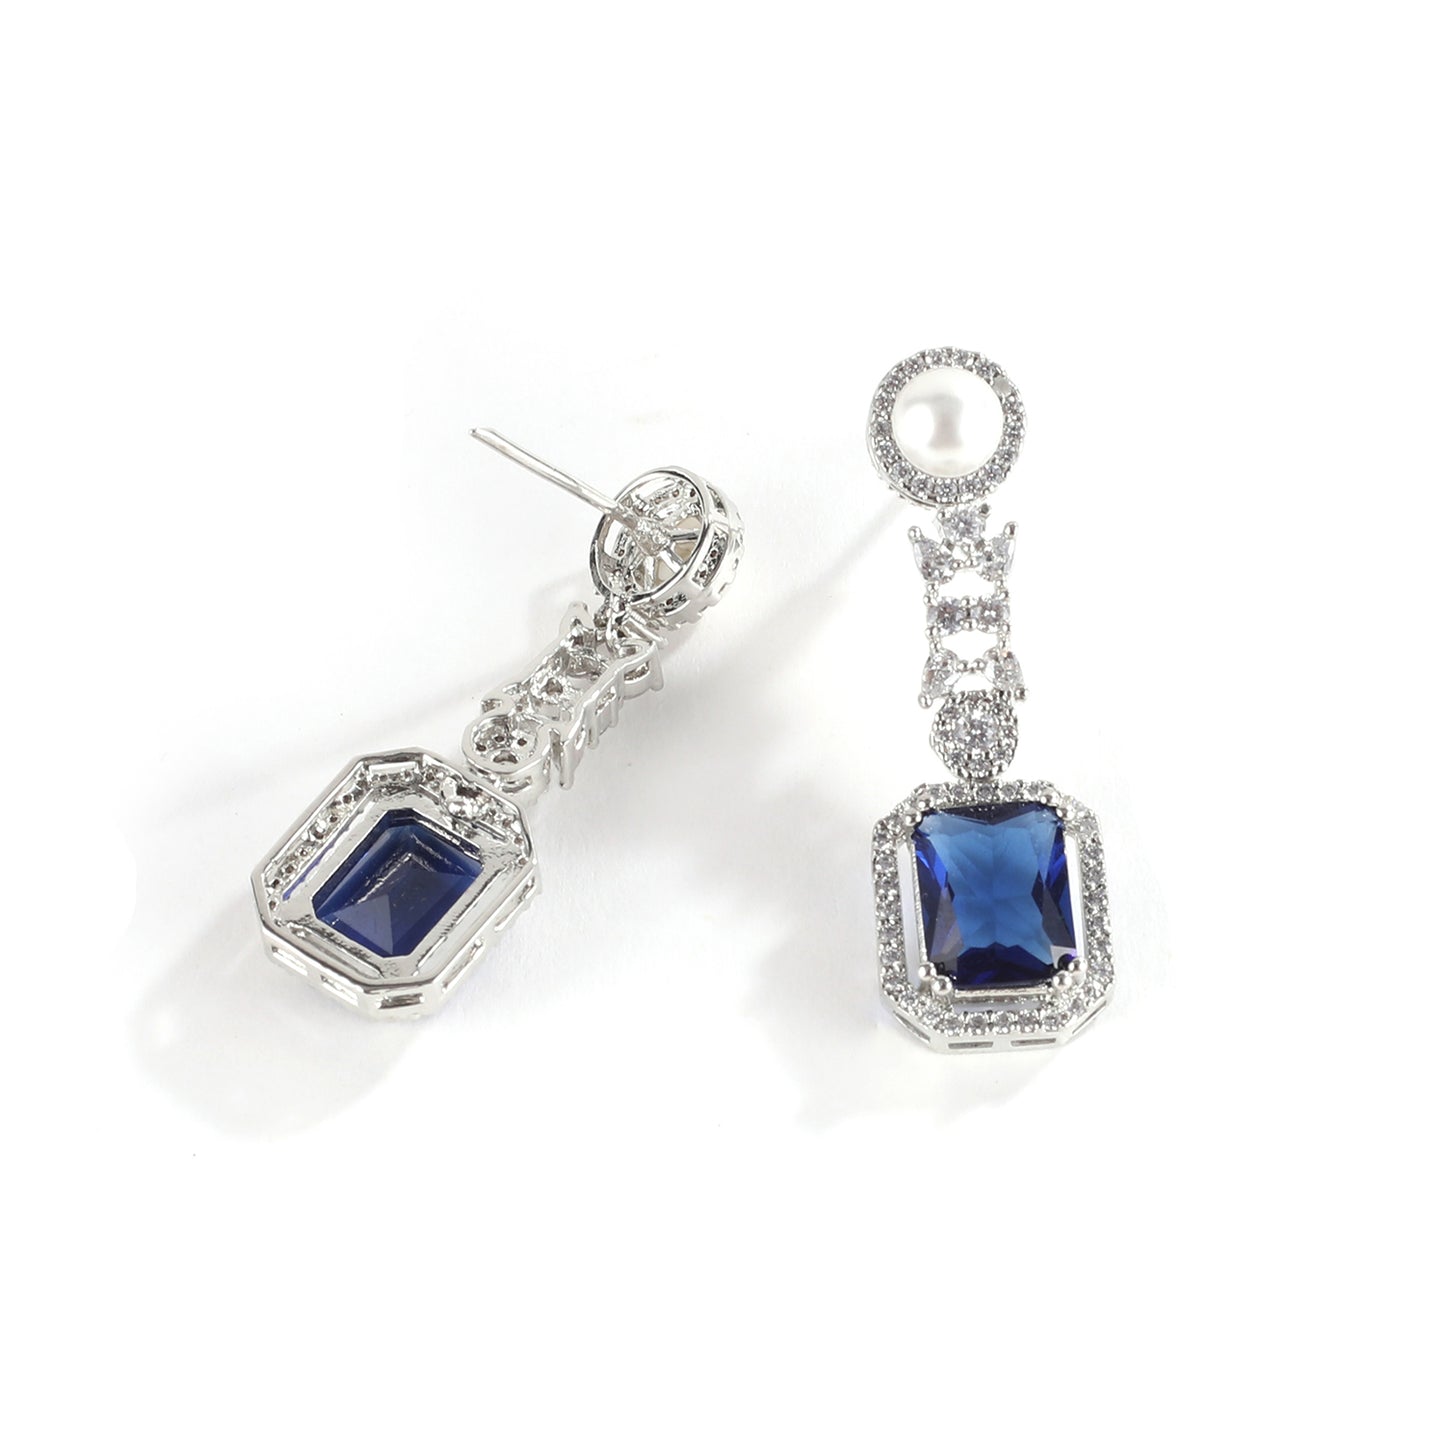 Designer Victorian Silver Polish Studded Pendant Style Sapphire Necklace Set with Earrings